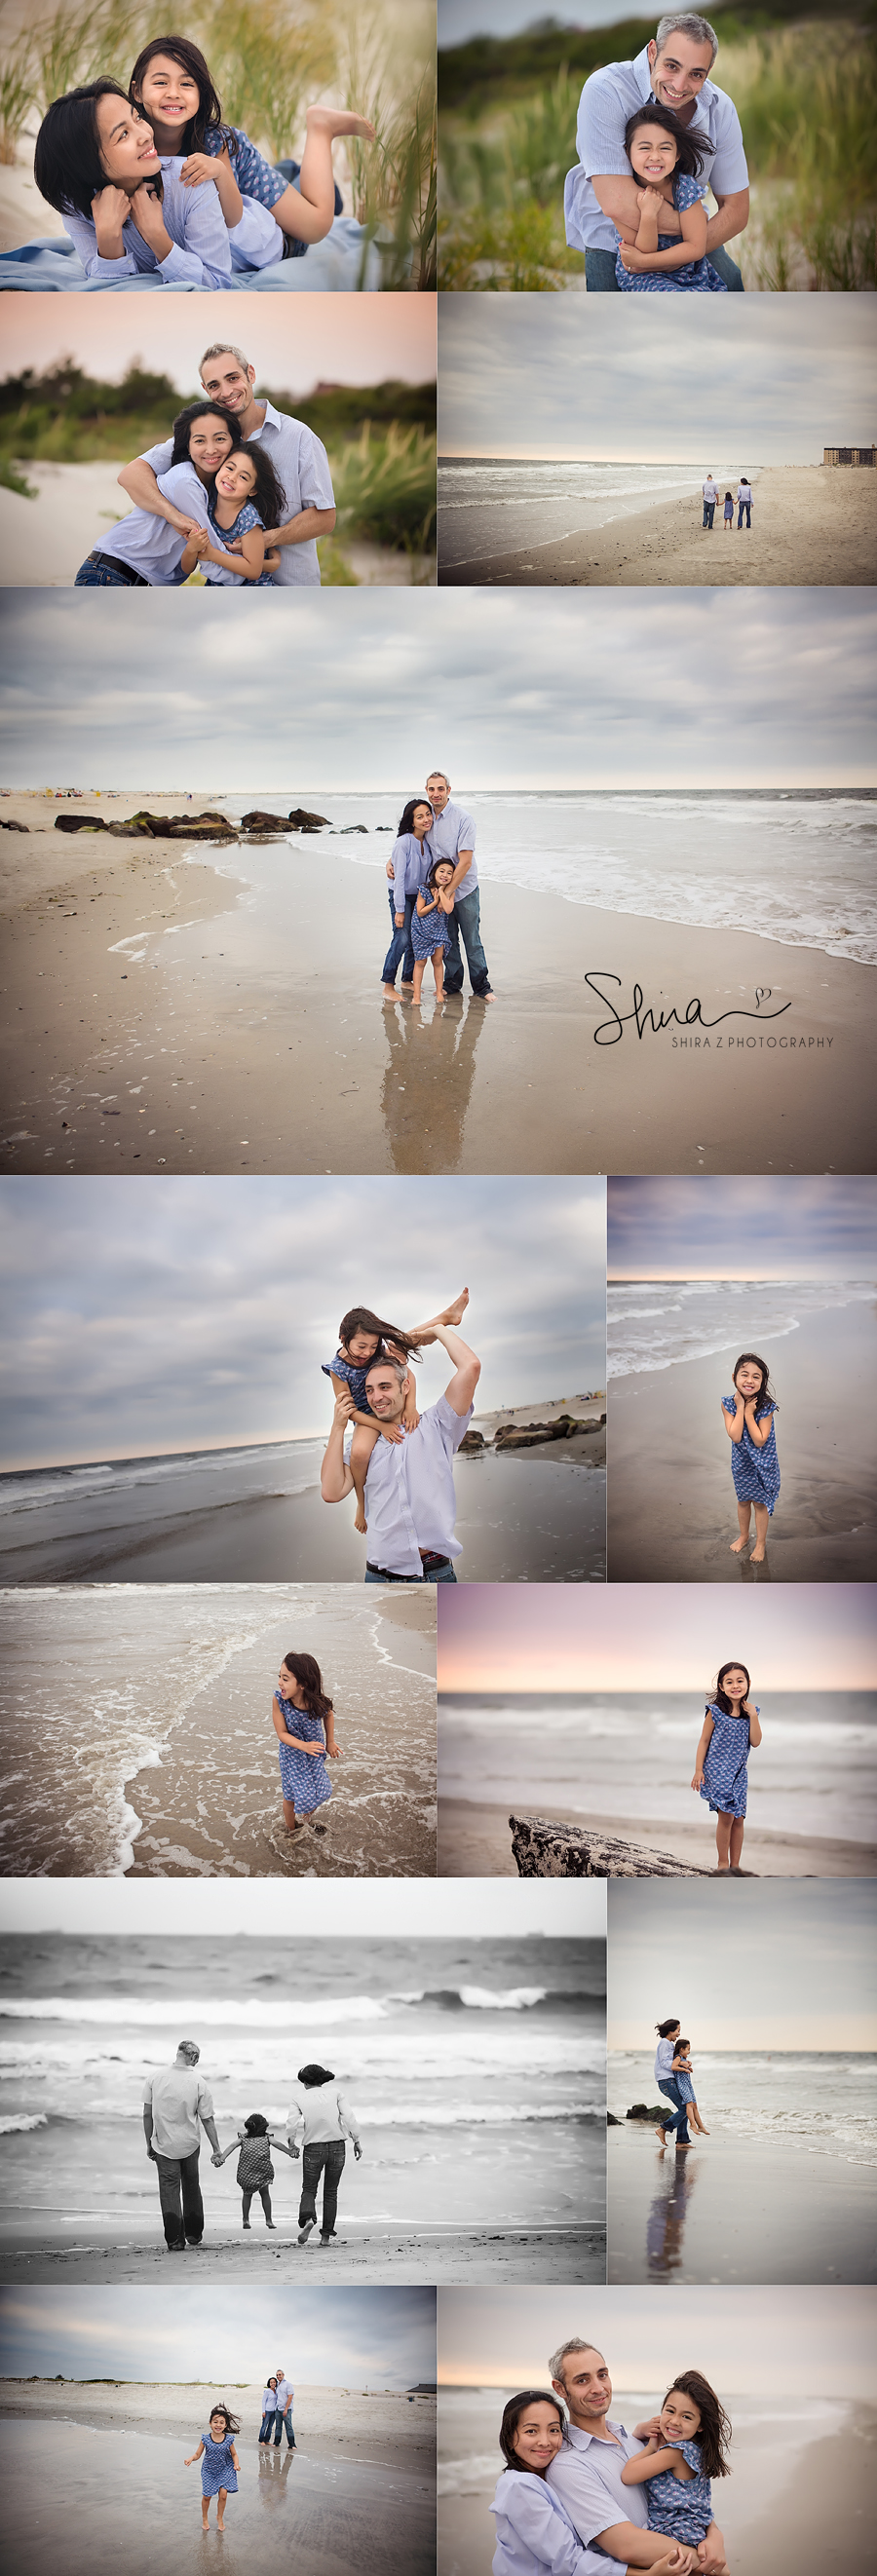 Collage of Long Island Family Long Beach Portraits